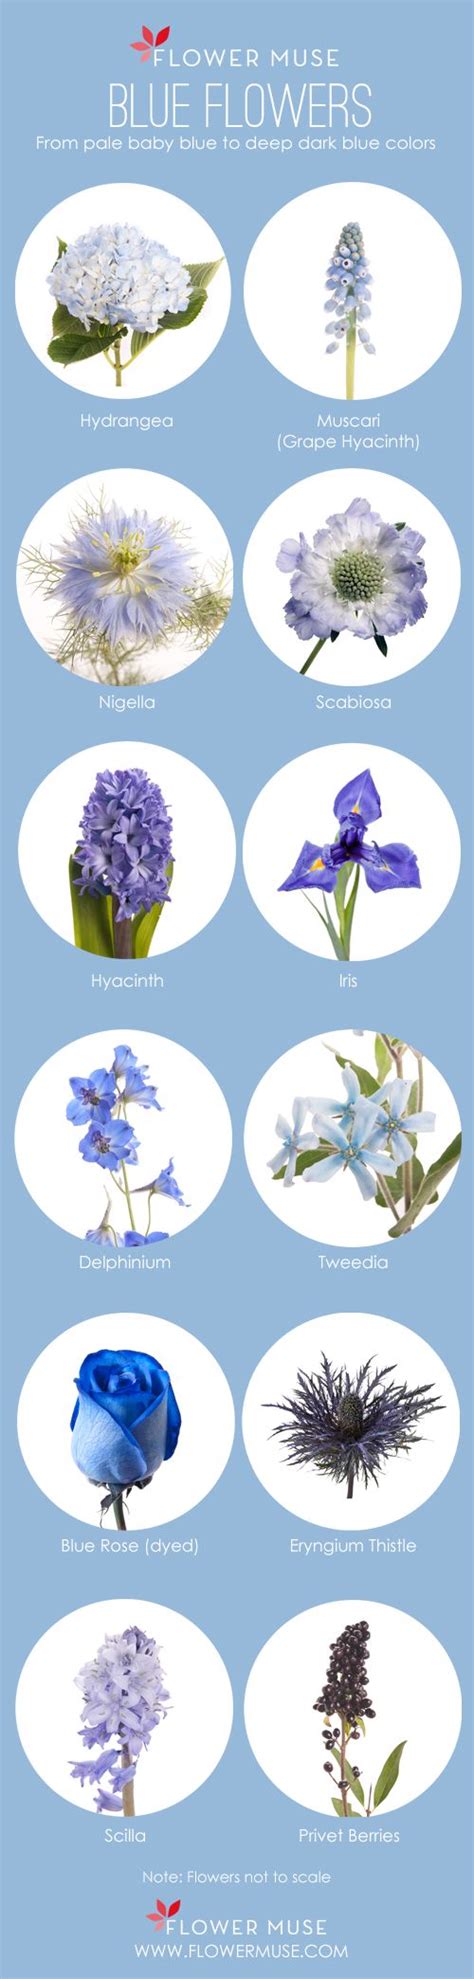 Blue Flowers Images And Names ~ Shower Baby Starry Night Decorations